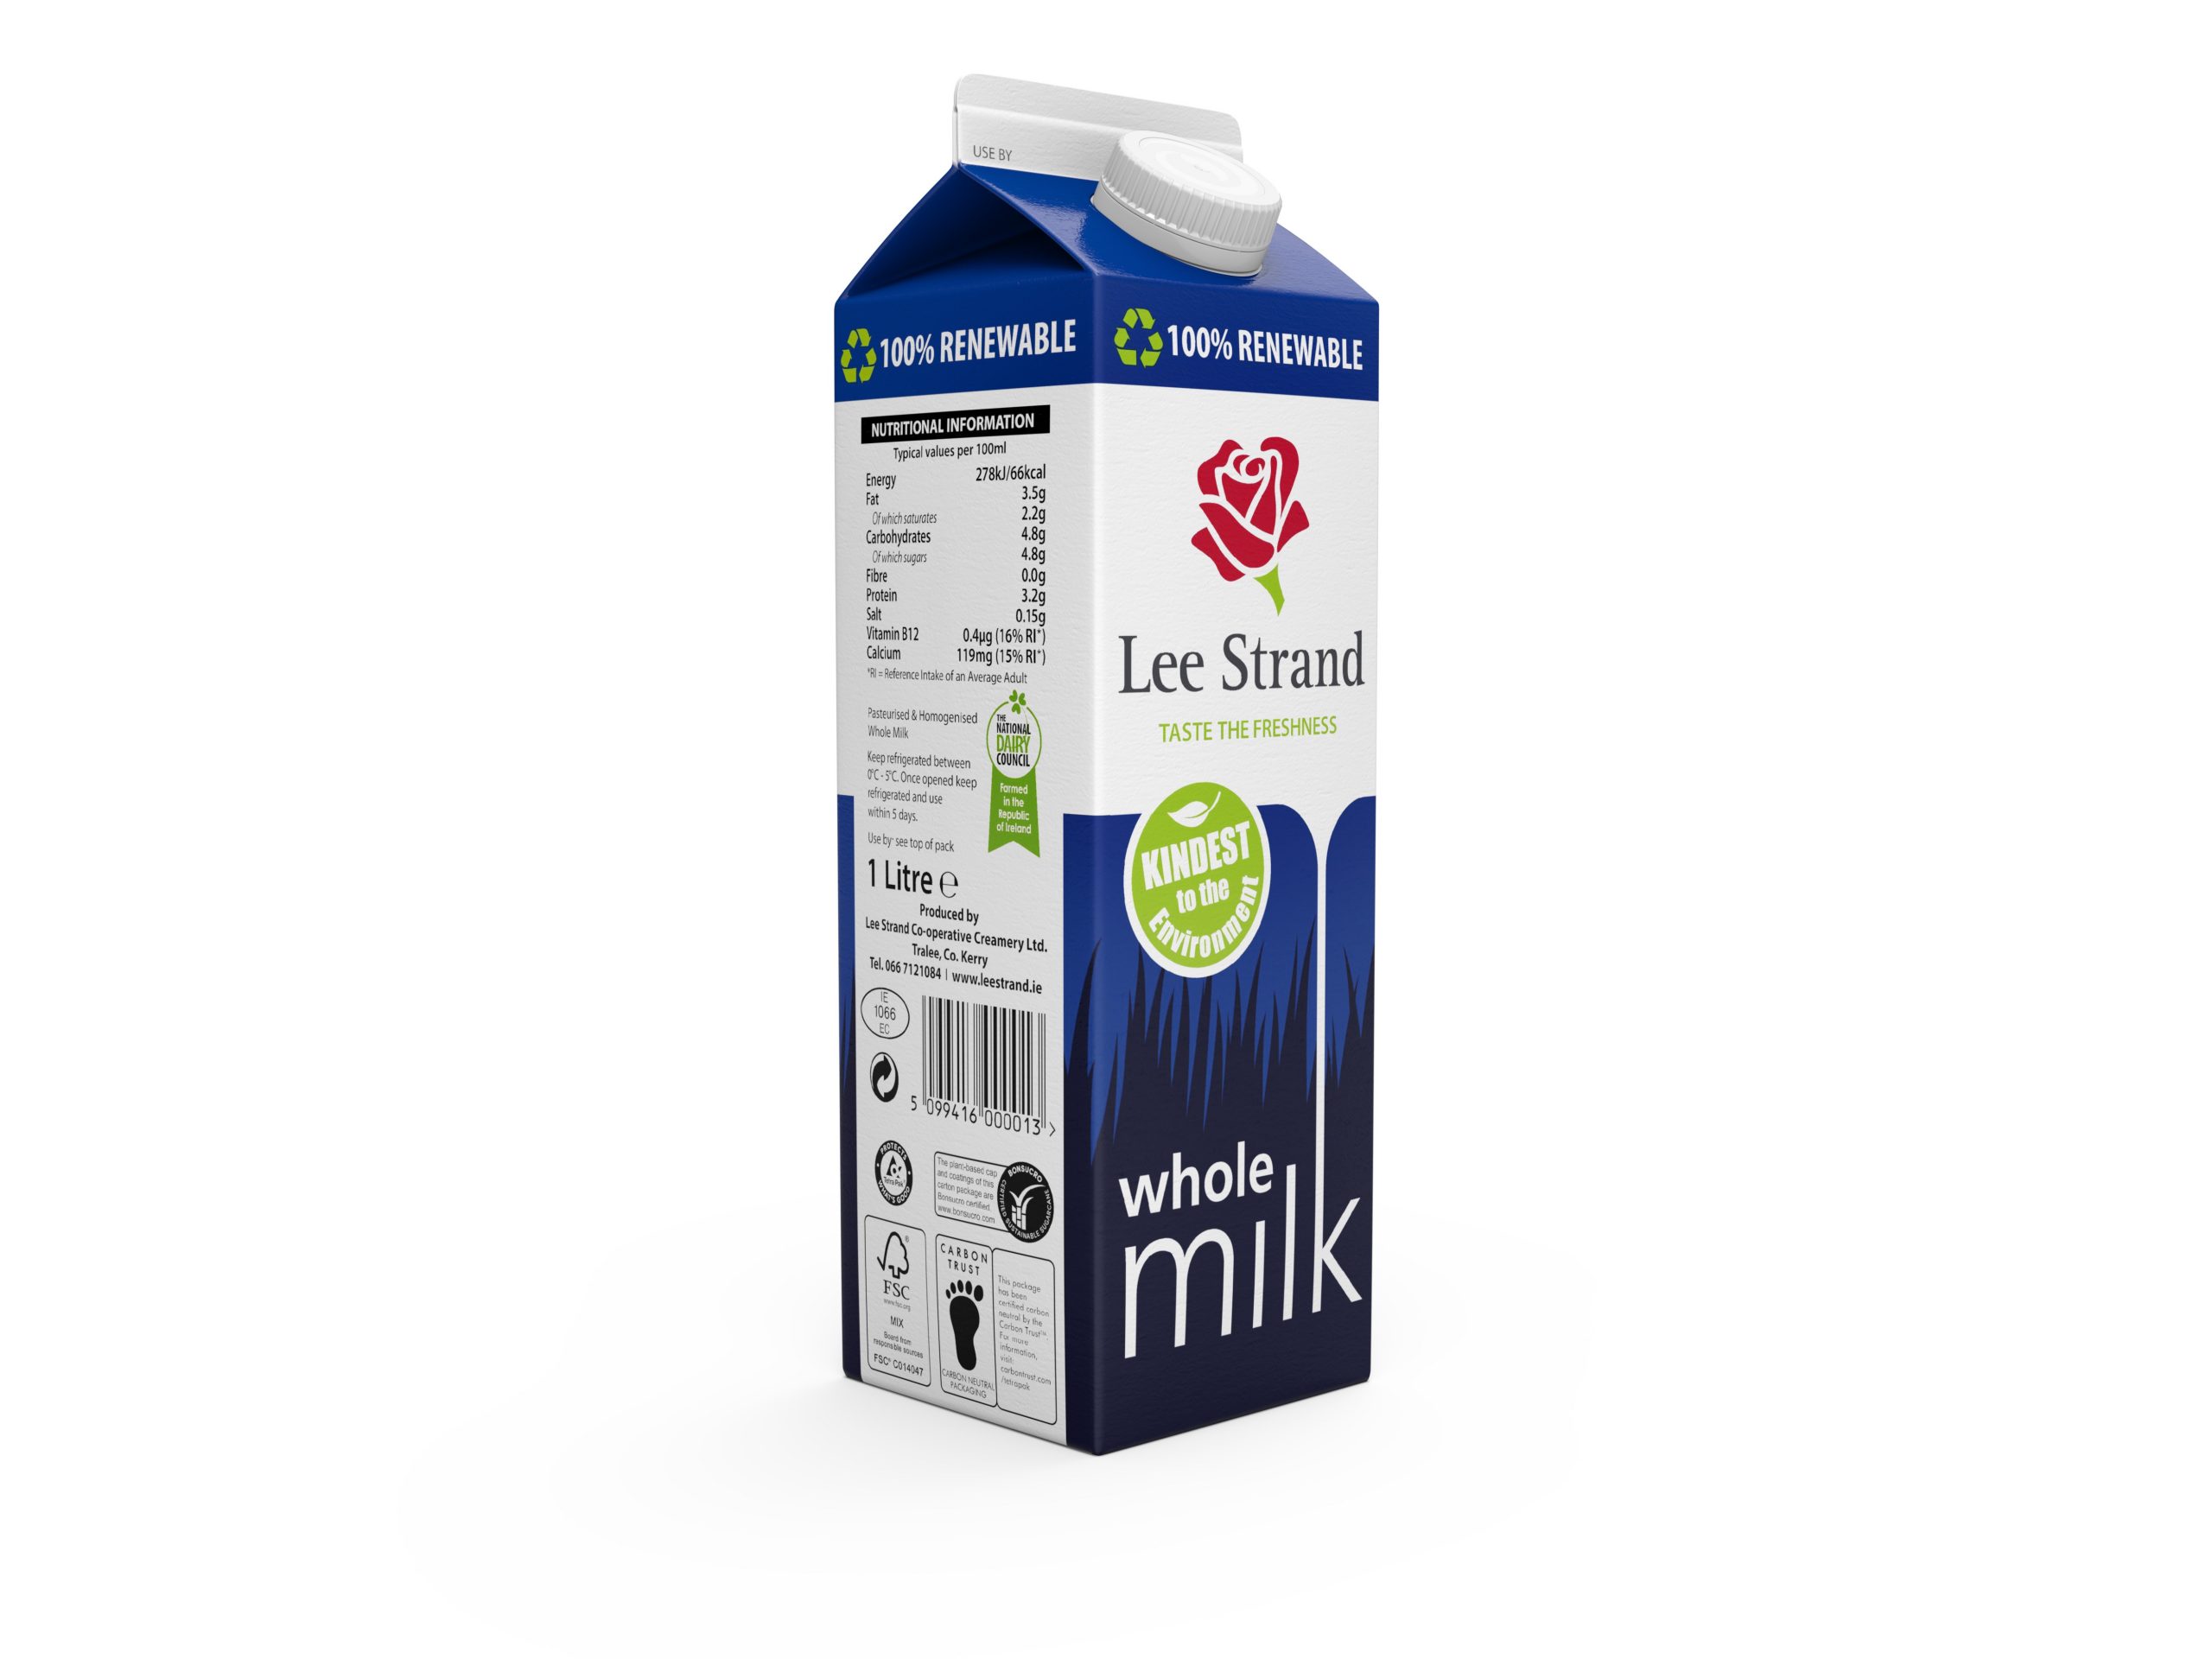 Dairy firm Lee Strand uses Tetra Pak’s Rex Plant-based packaging